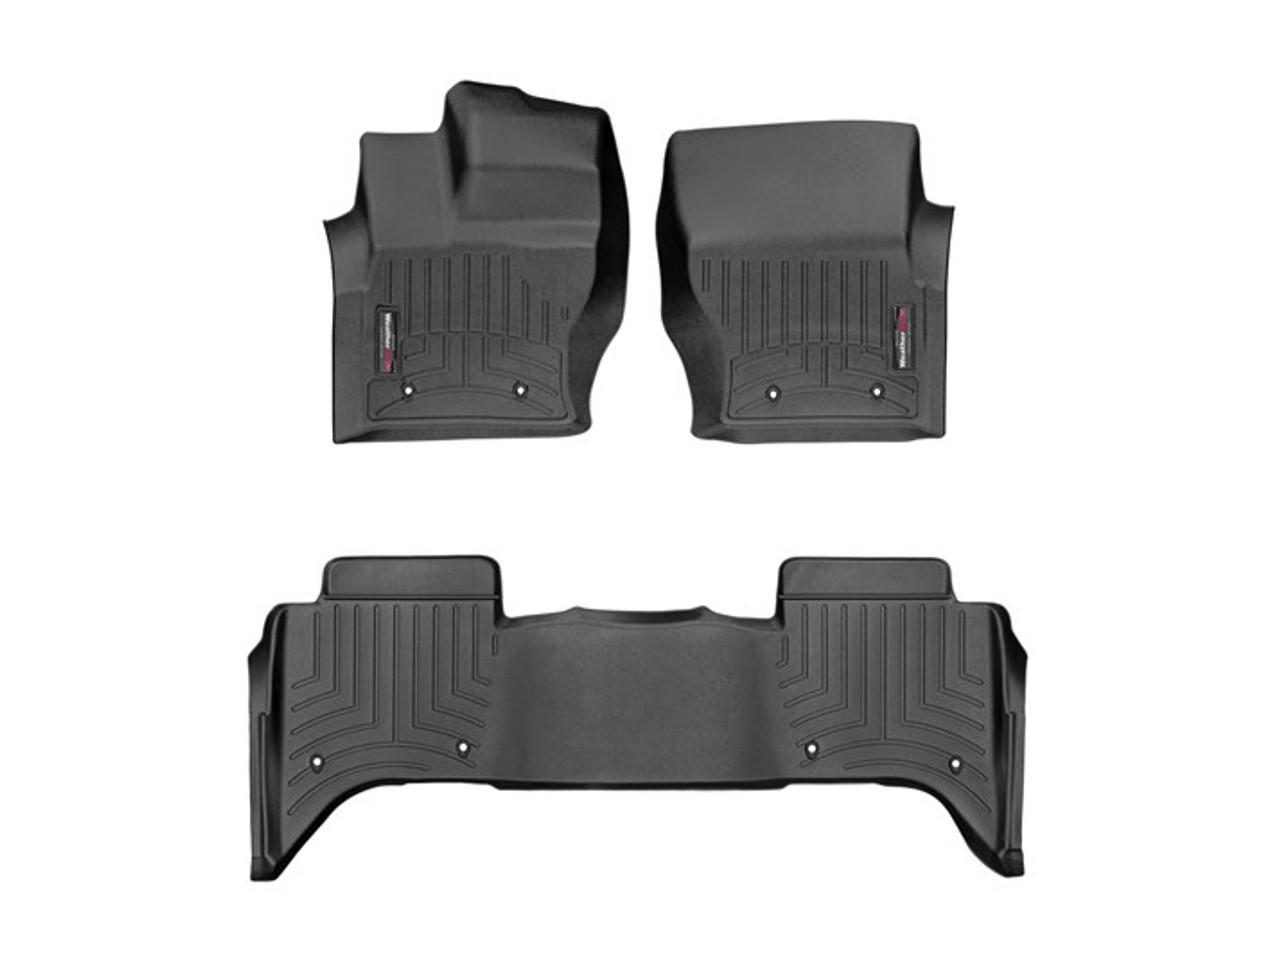 WeatherTech 2018+ Land Rover Range Rover (No 2nd Row Console) Front & Rear FloorLiner - Black